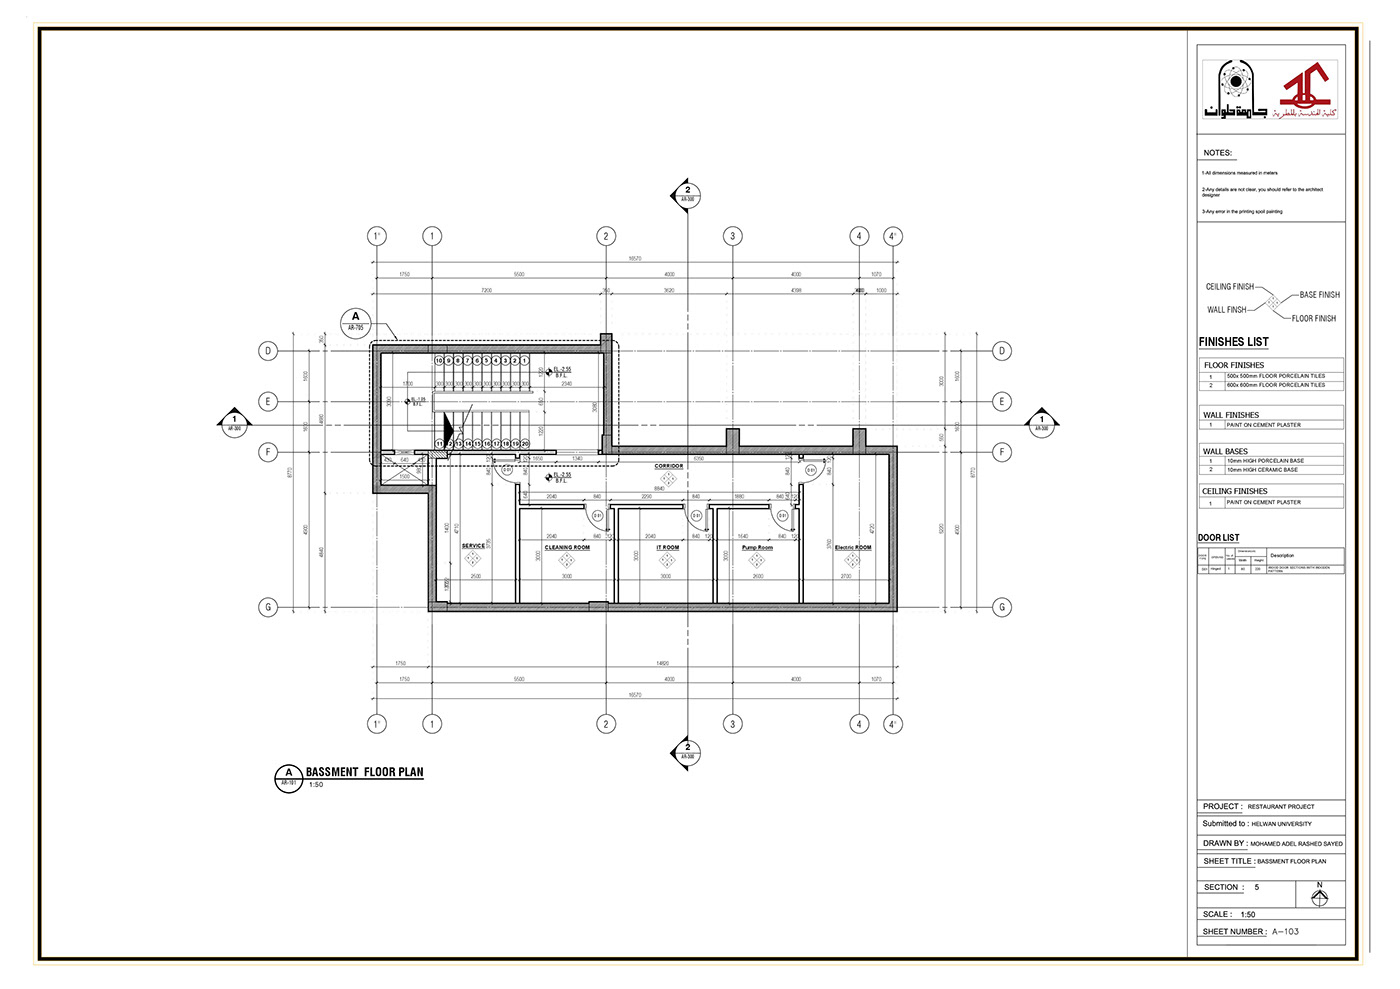 AutoCAD construction details drawings lounge restaurant revit shopdrawing working working drawings